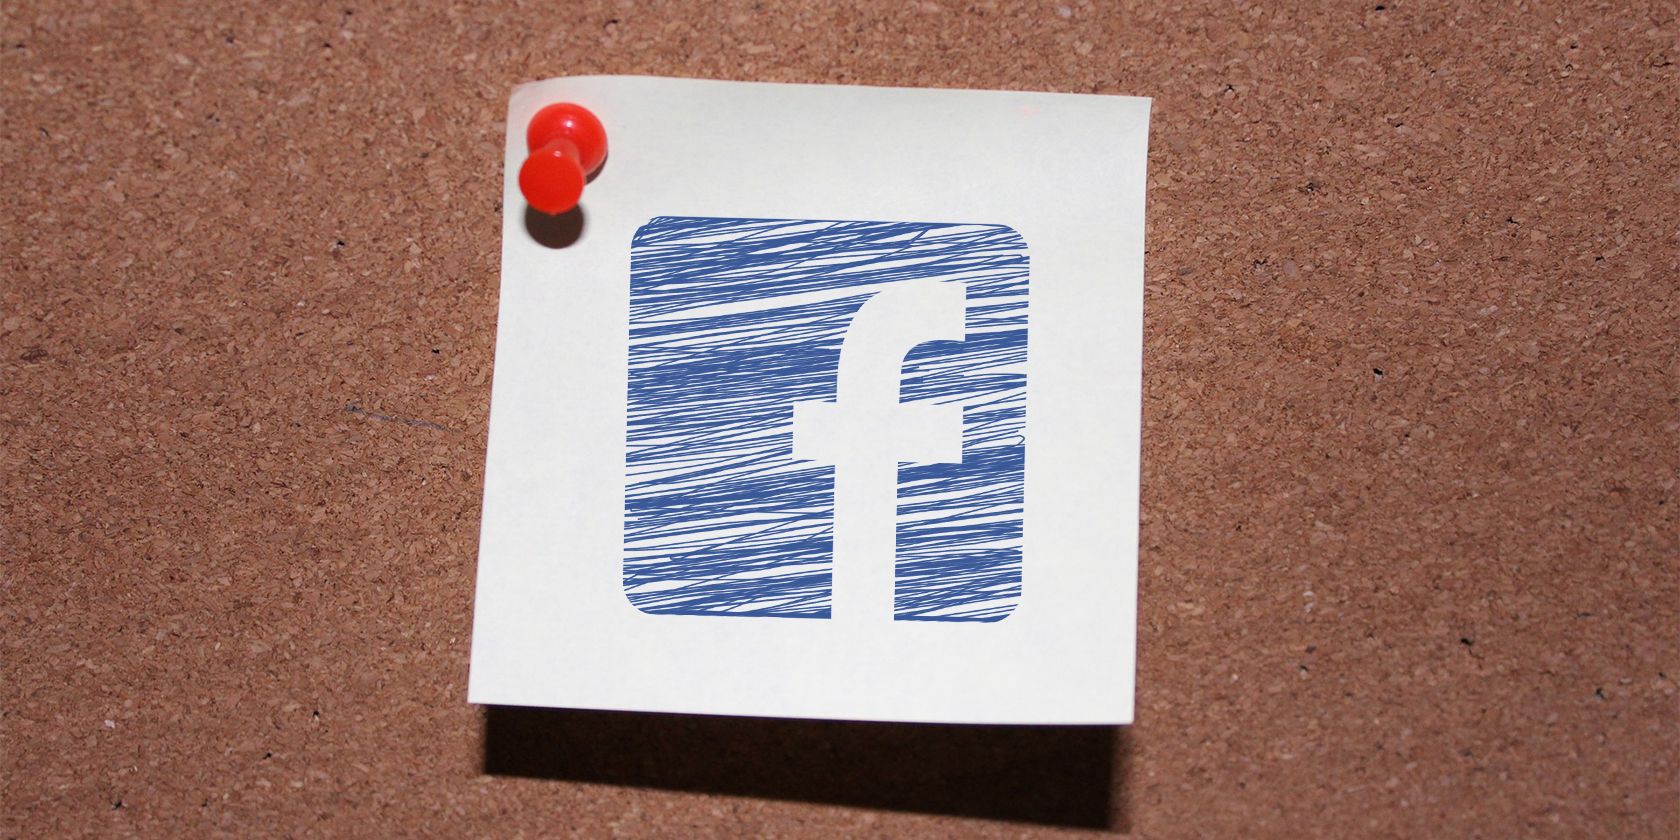 How to Pin a Facebook Post